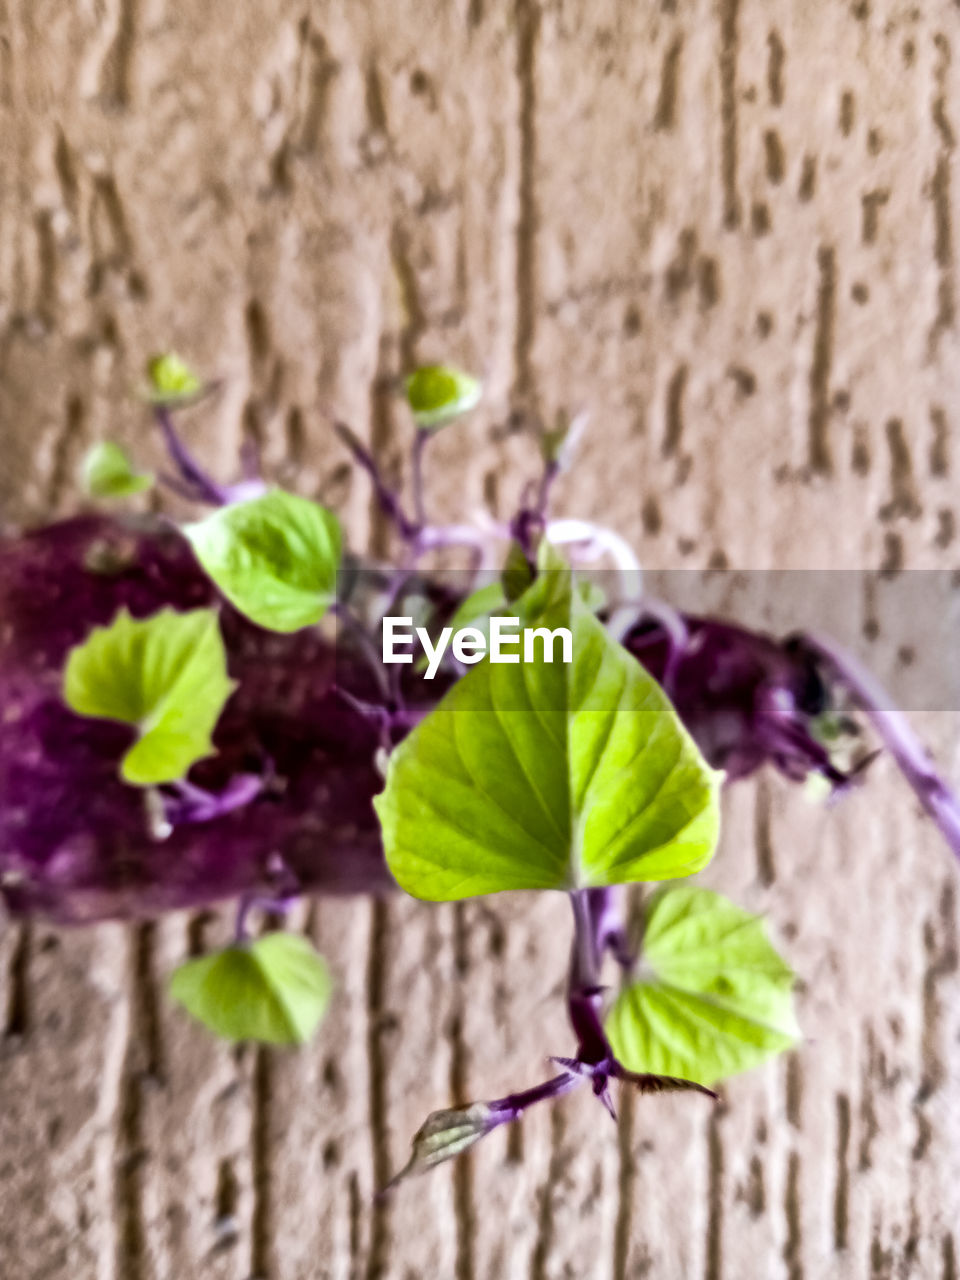 plant, plant part, leaf, nature, purple, green, growth, close-up, flower, beauty in nature, freshness, flowering plant, no people, fragility, focus on foreground, branch, day, macro photography, outdoors, wall - building feature, wood, plant stem, botany, selective focus, petal, violet, lilac